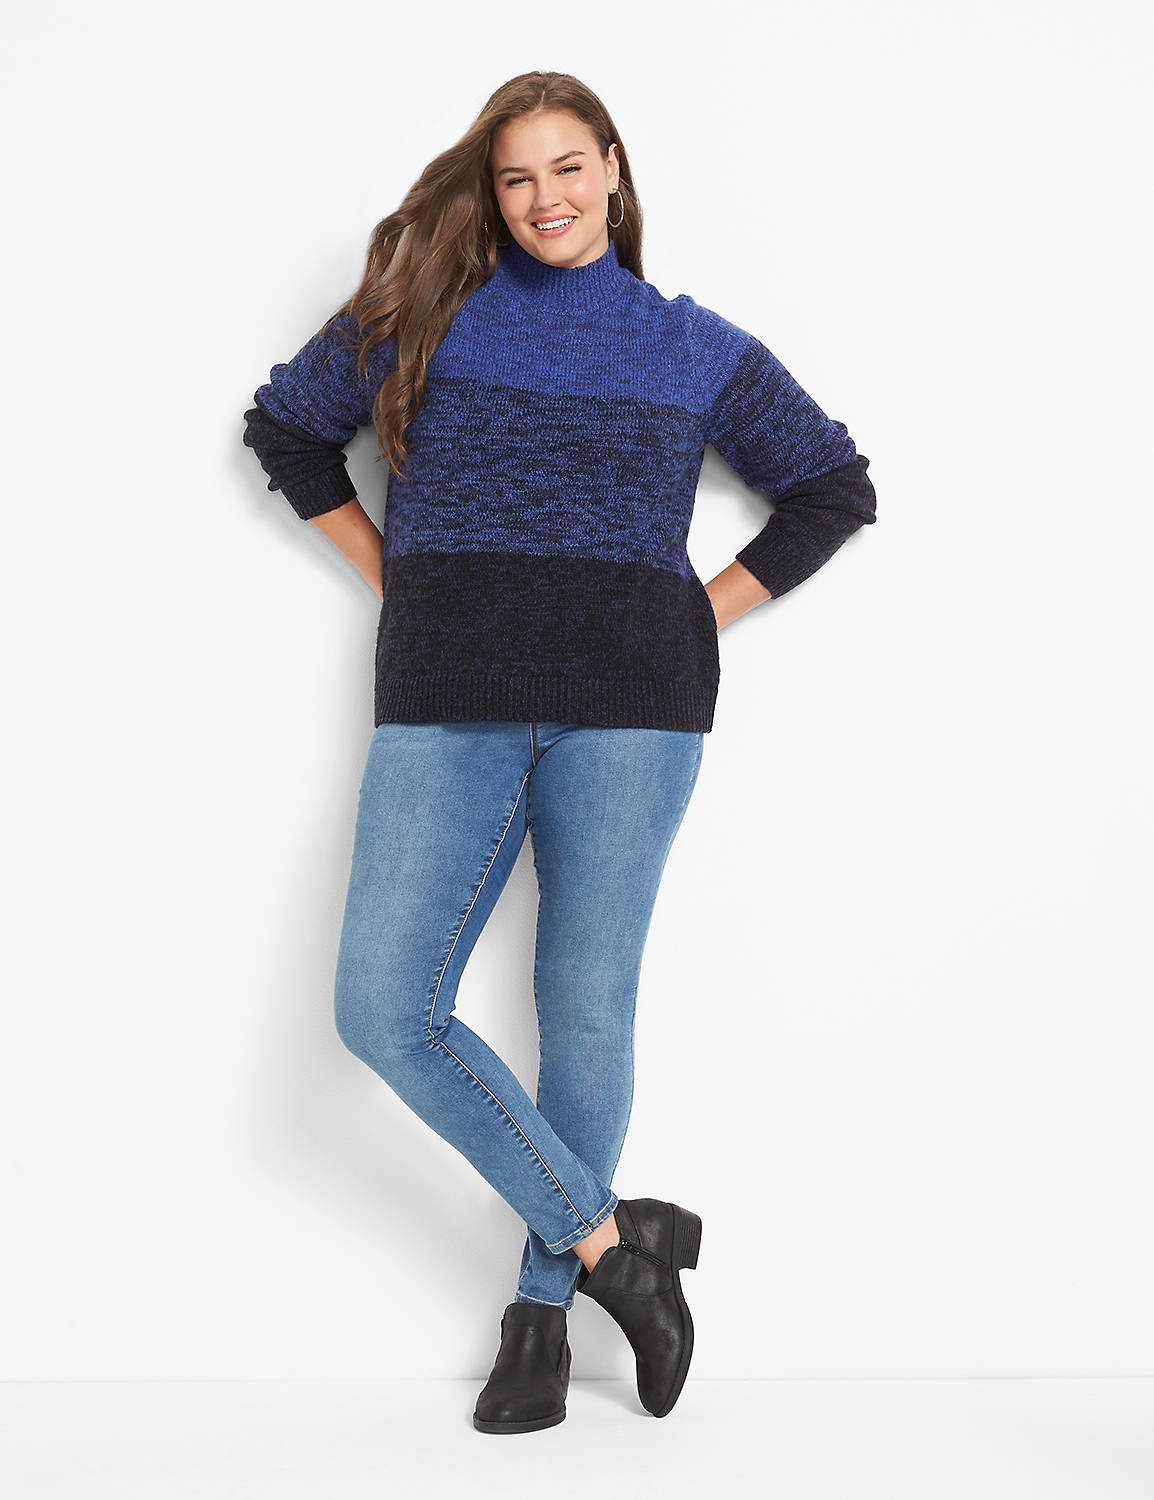 Mock-Neck Ombre Sweater Product Image 3